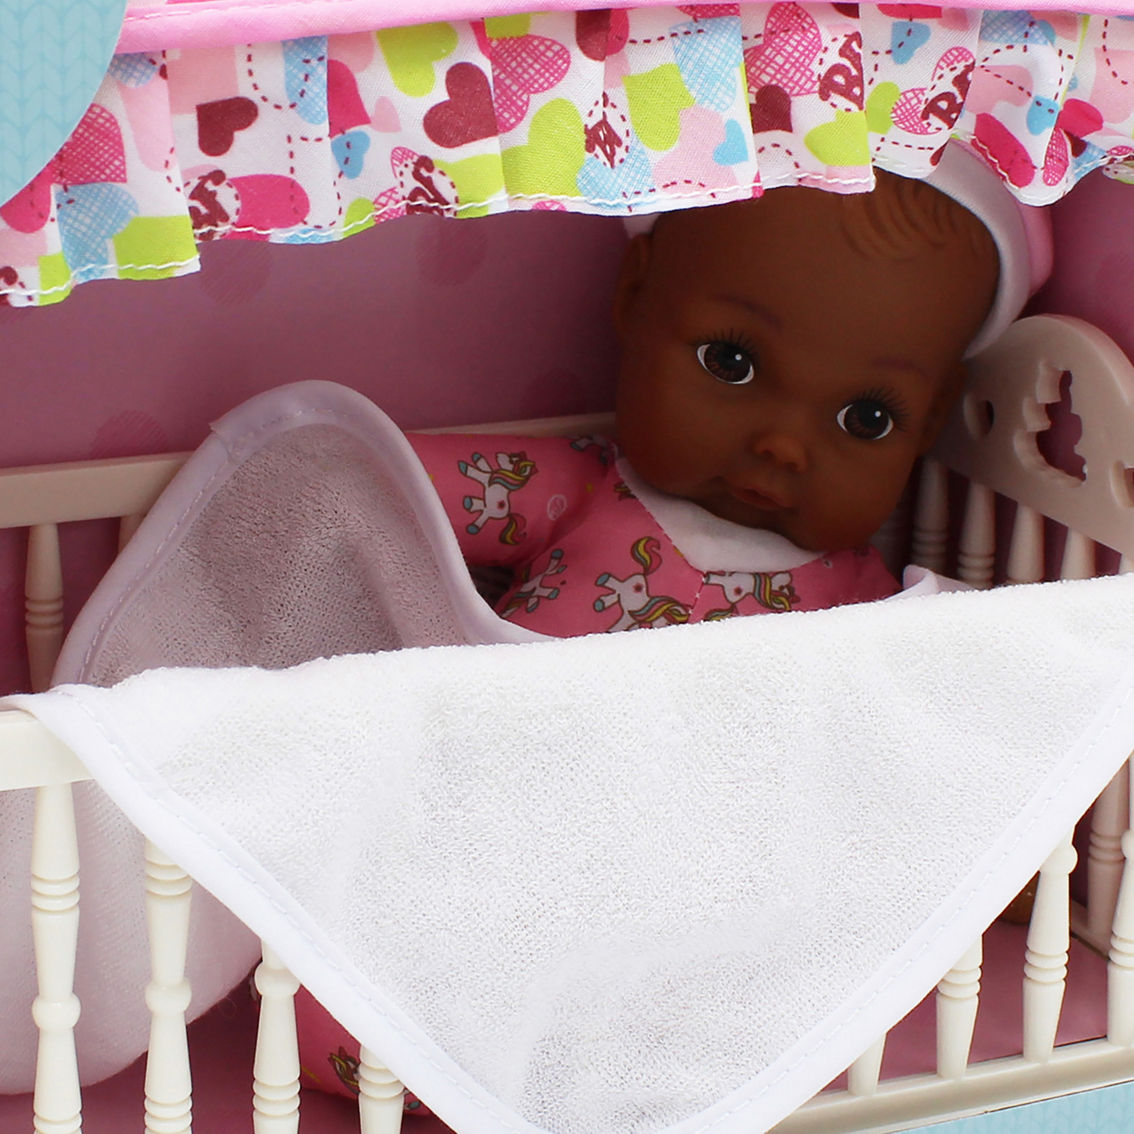 Baby's First Canopy Crib with 9 in. Doll - Image 5 of 5